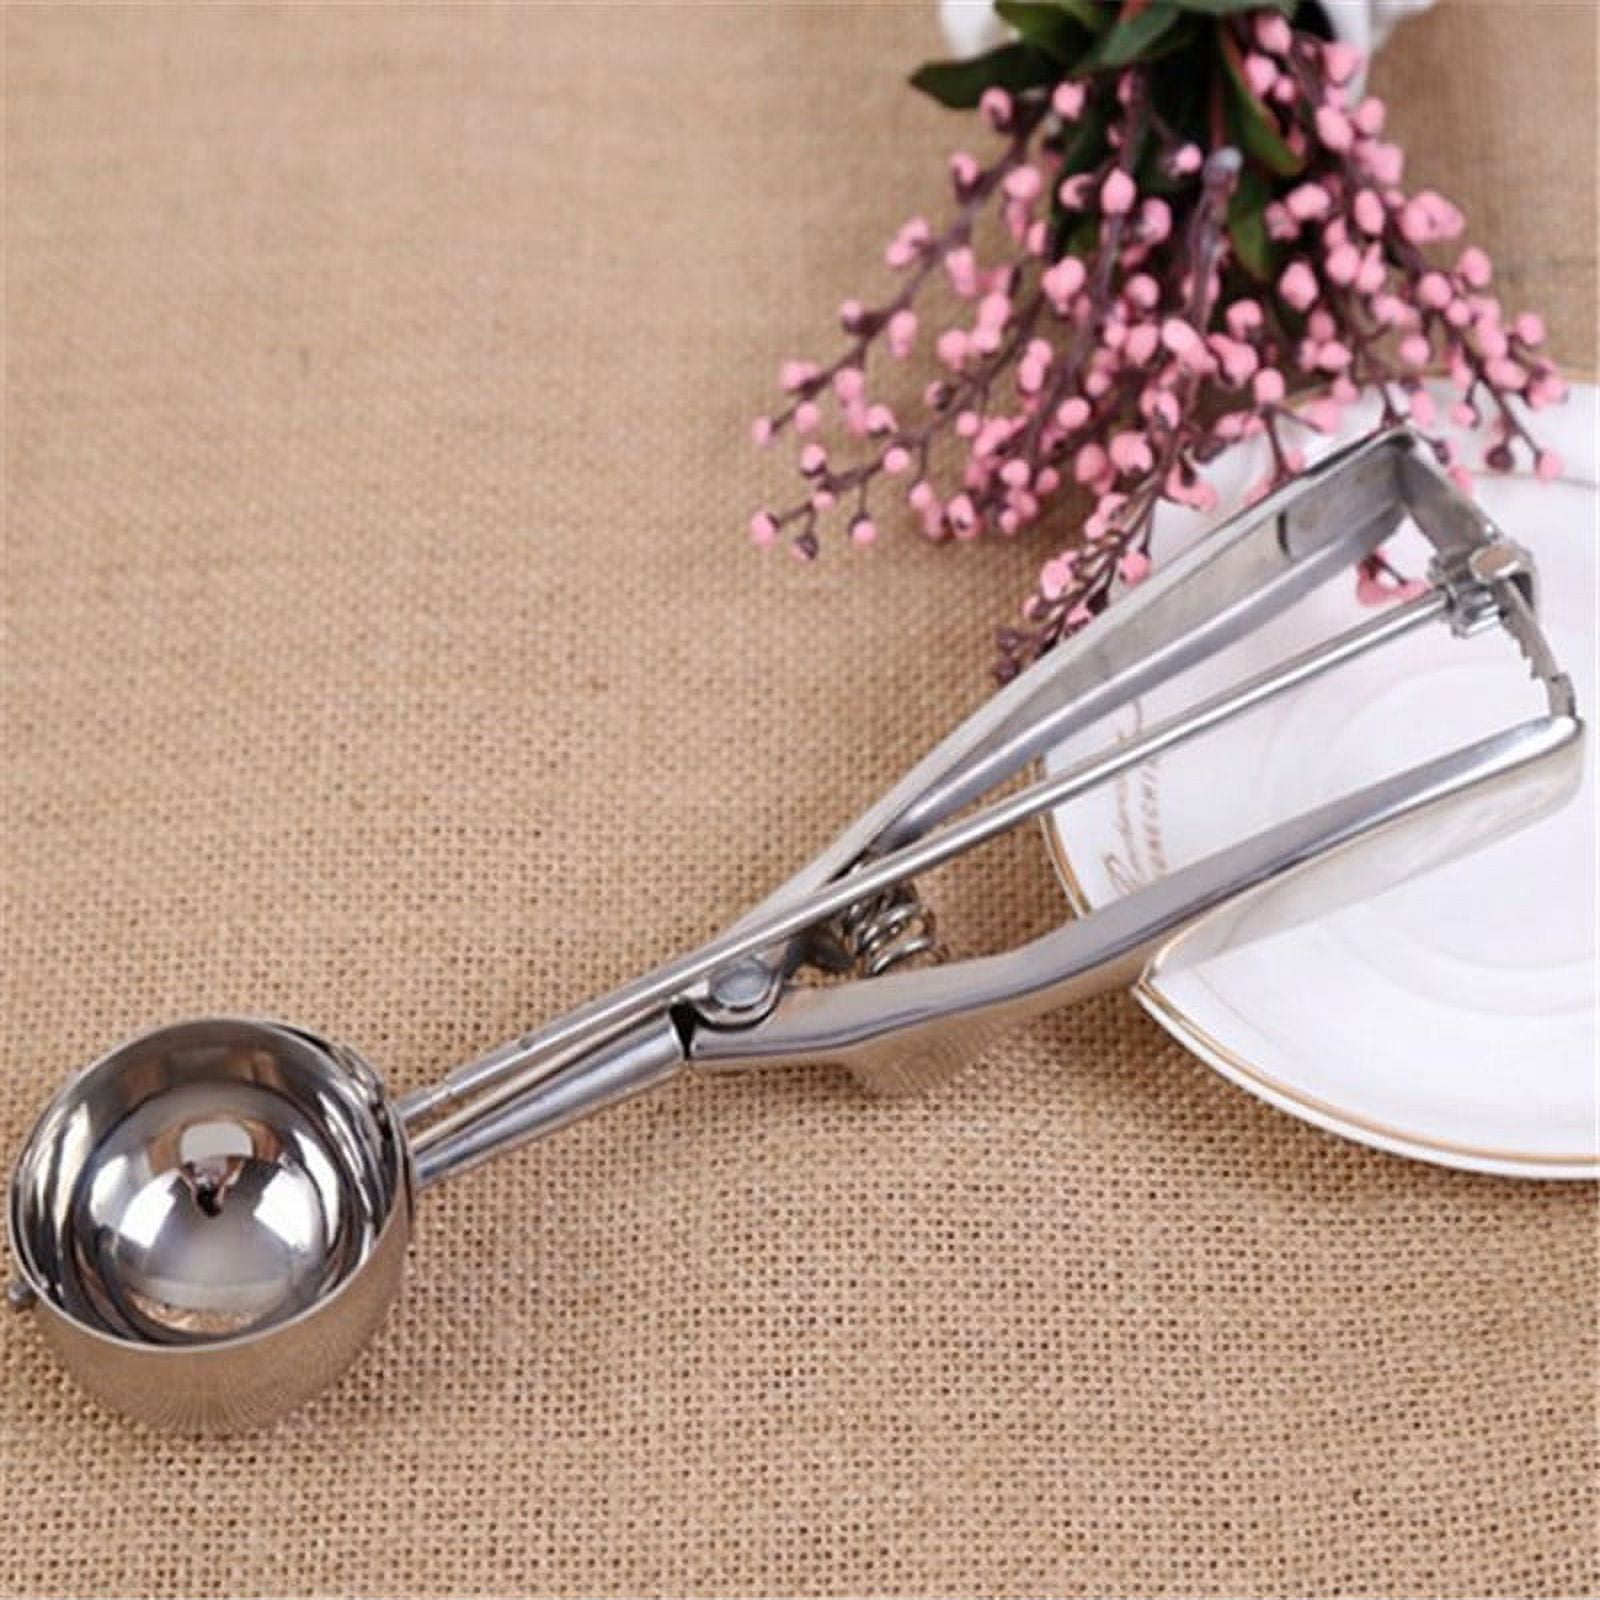 Spring Chef - Cookie Scoop with Trigger Release, Multifunctional Scoop for  Melon, Protein Balls, and Meatballs, Stainless Steel Medium Cookie Scoop